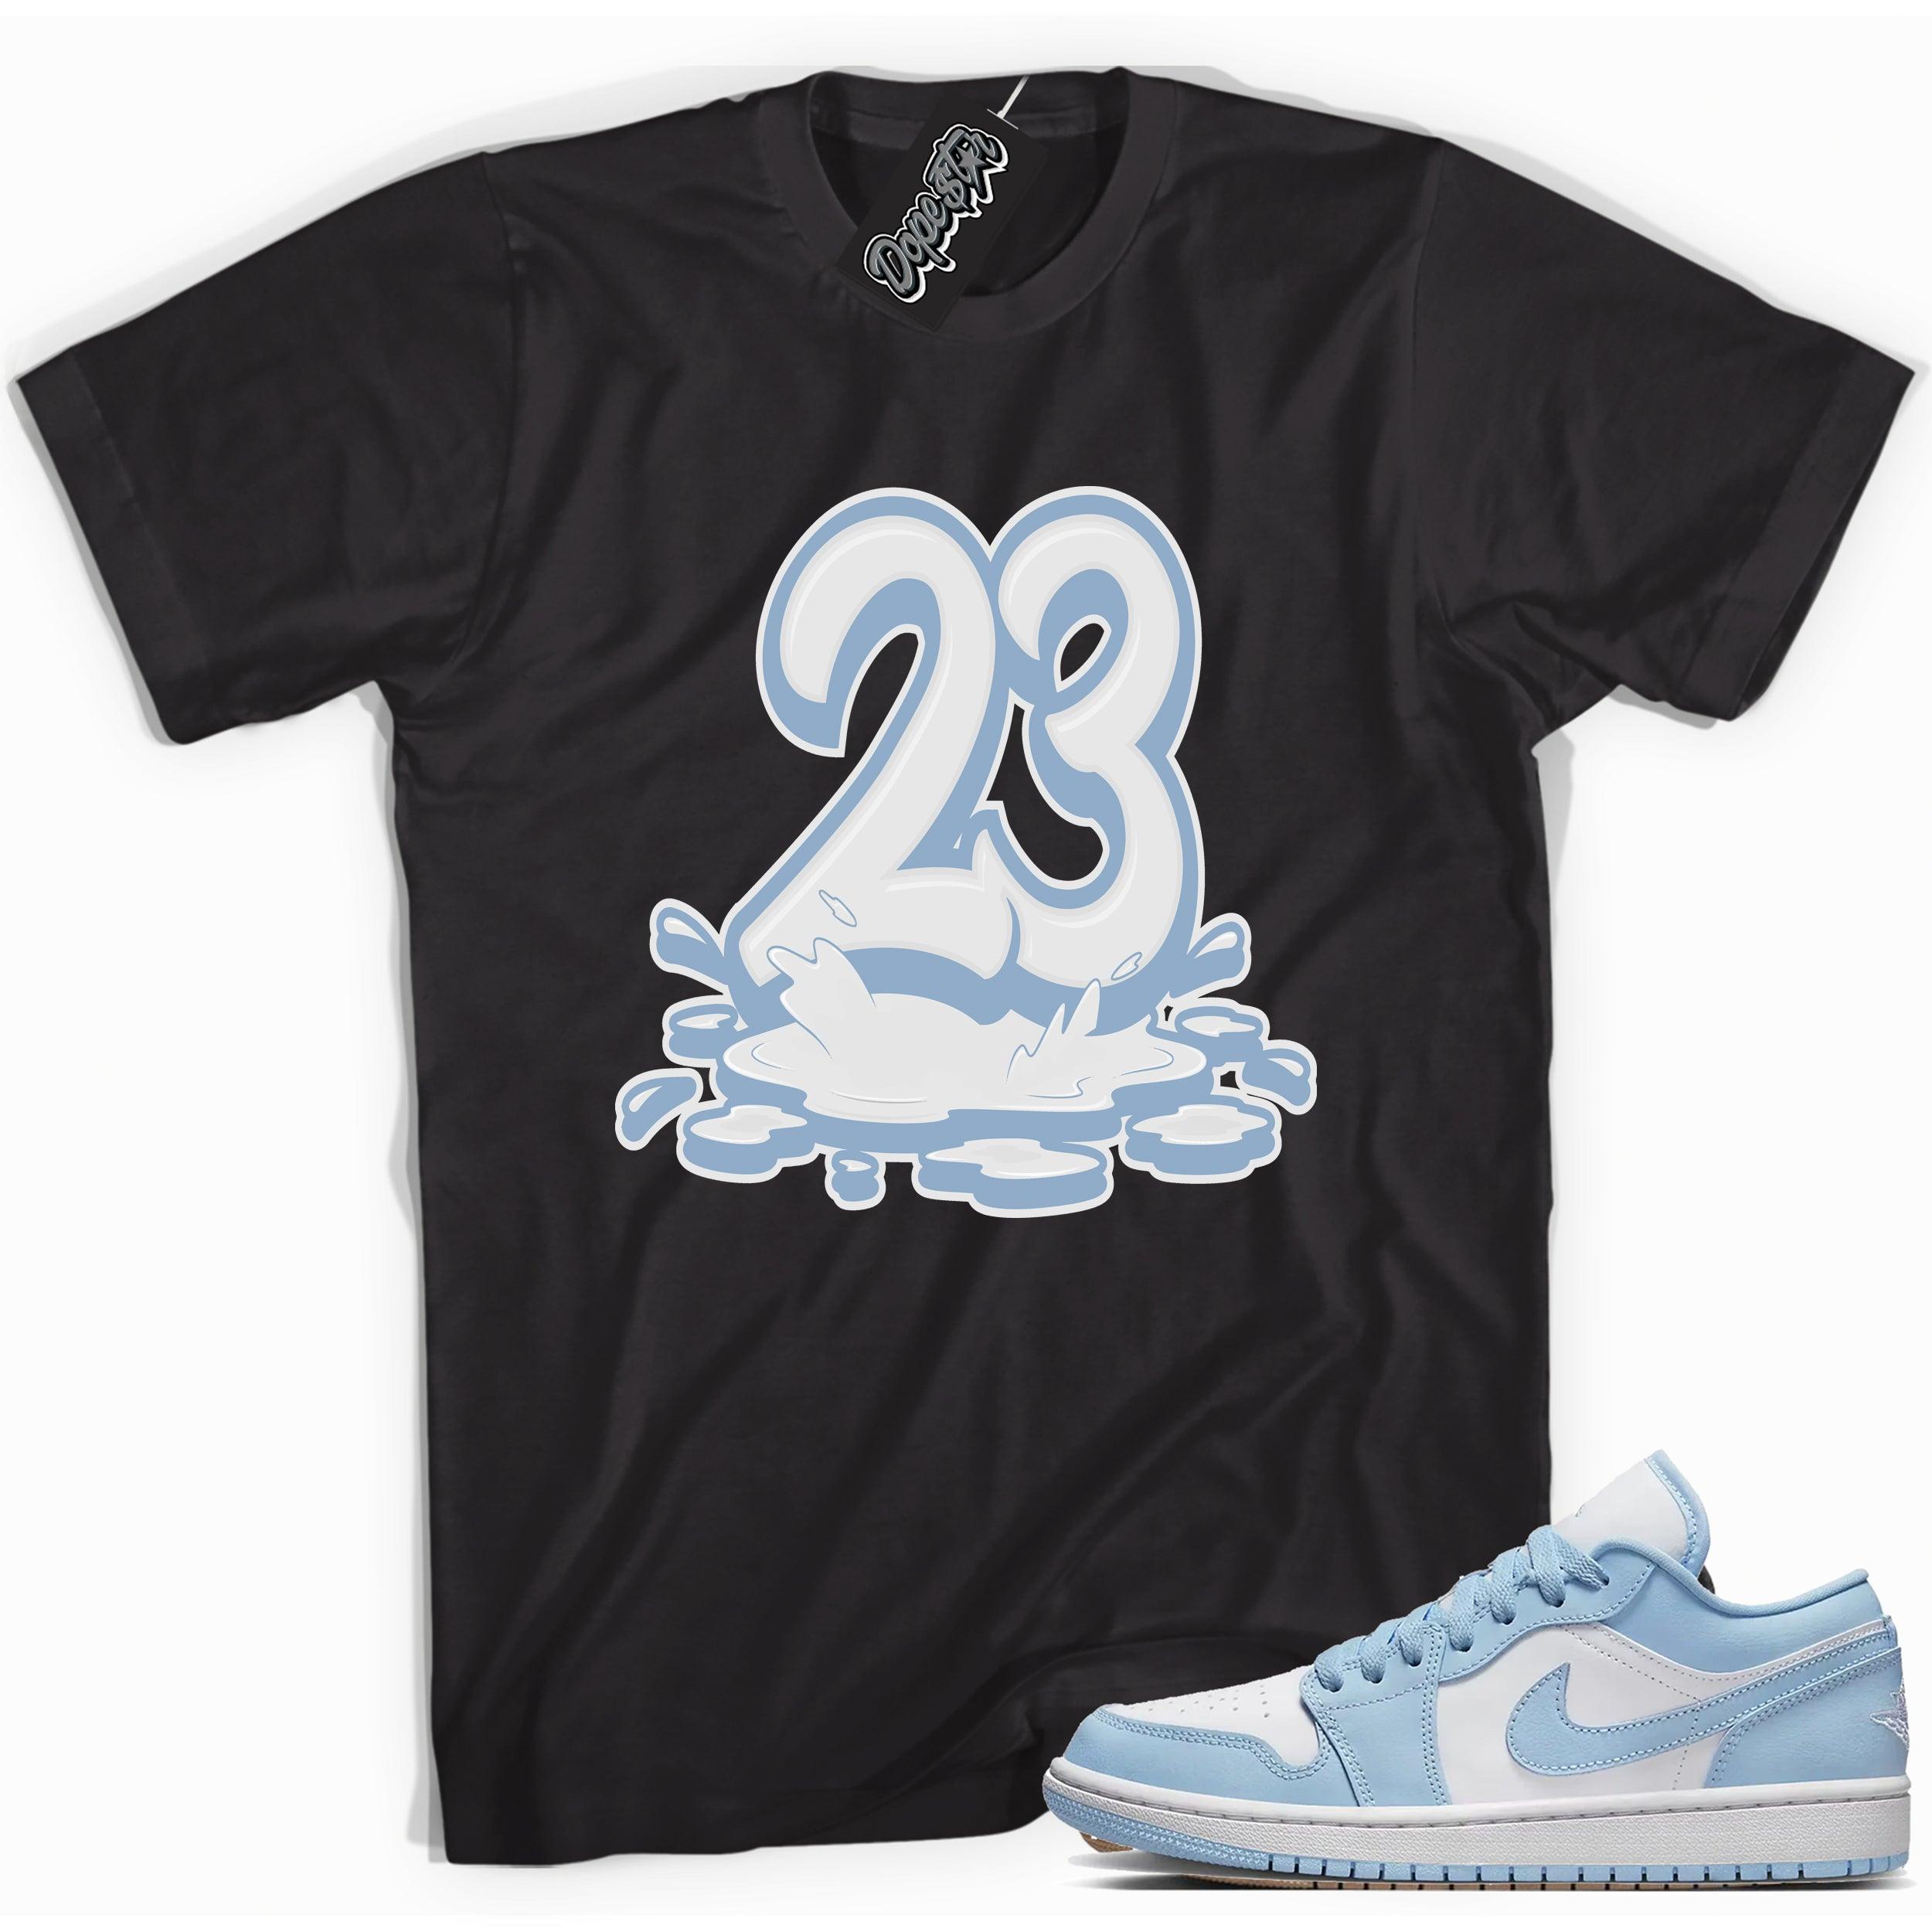 Cool Black graphic tee with “ 23 Melting ” print, that perfectly matches  AJ 1 Low Aluminum sneakers. 